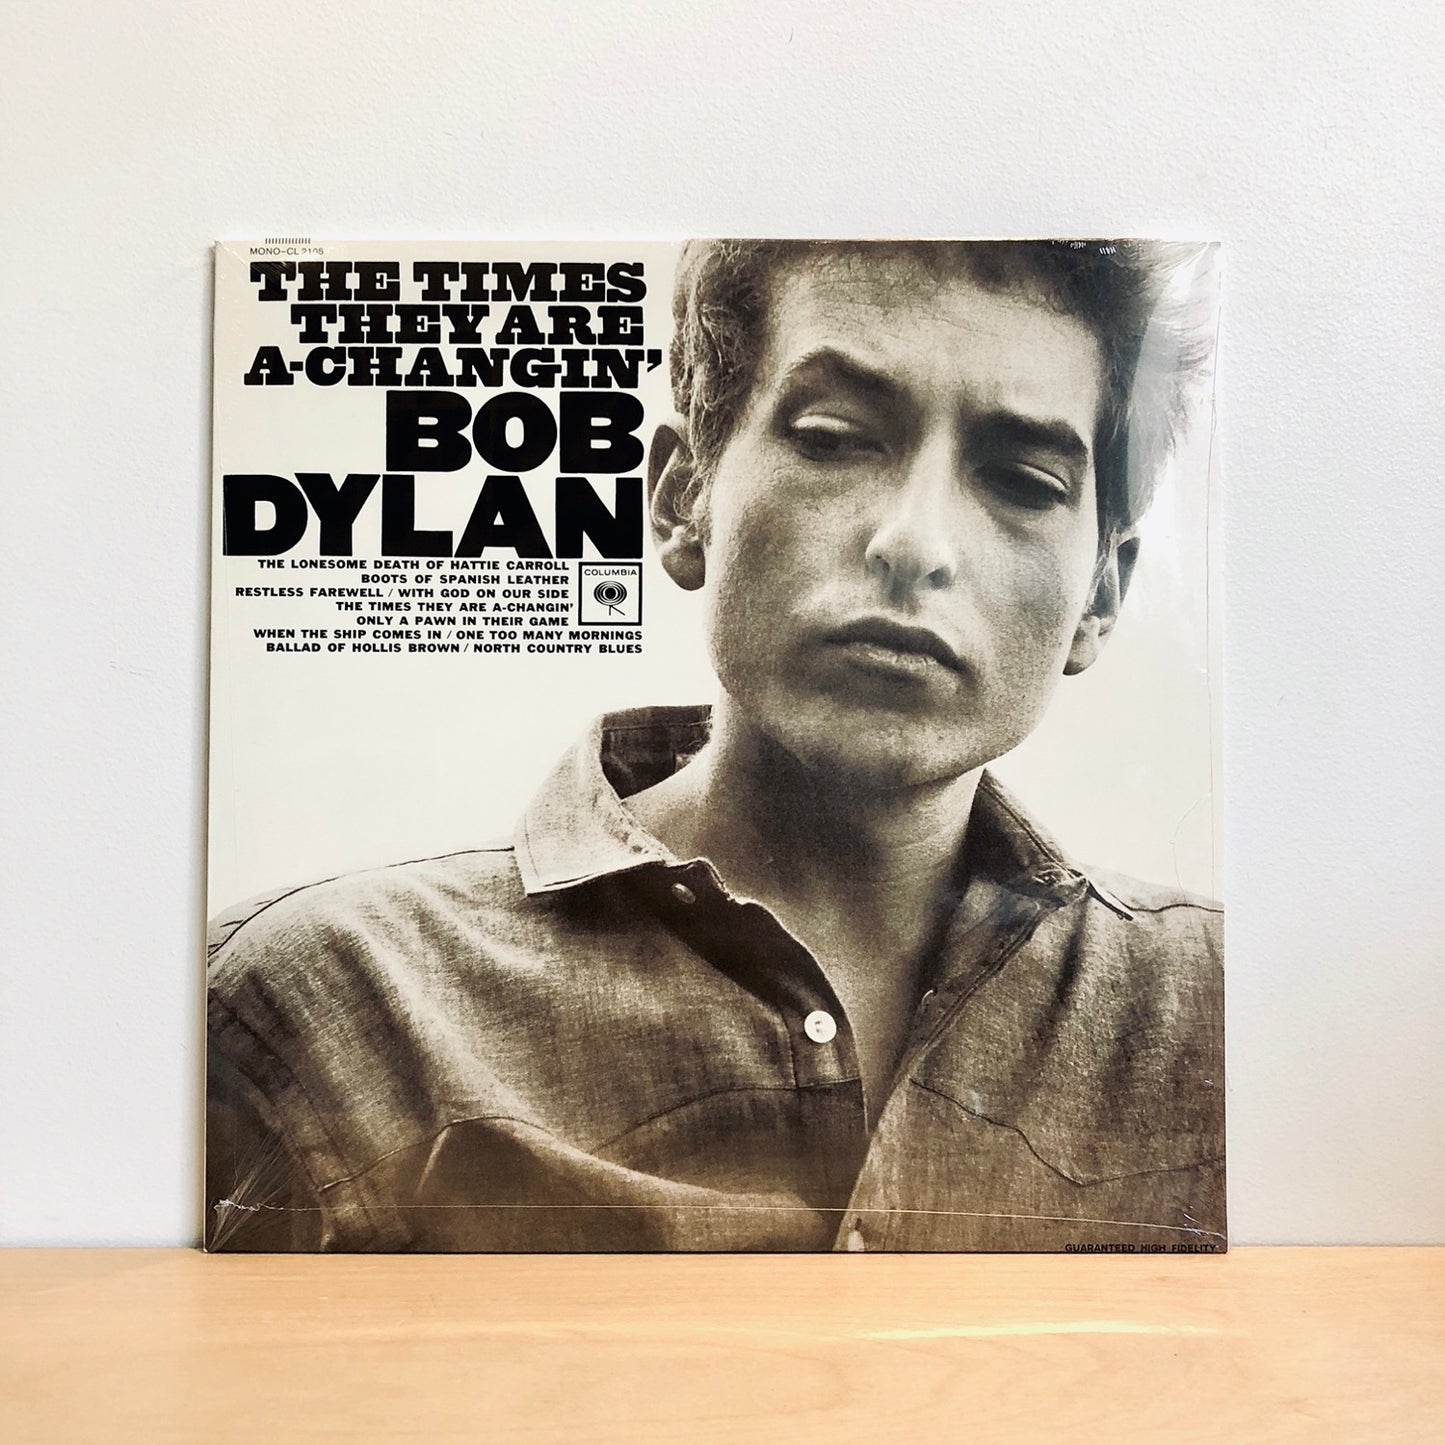 Bob Dylan - Times They Are A Changin' LP.